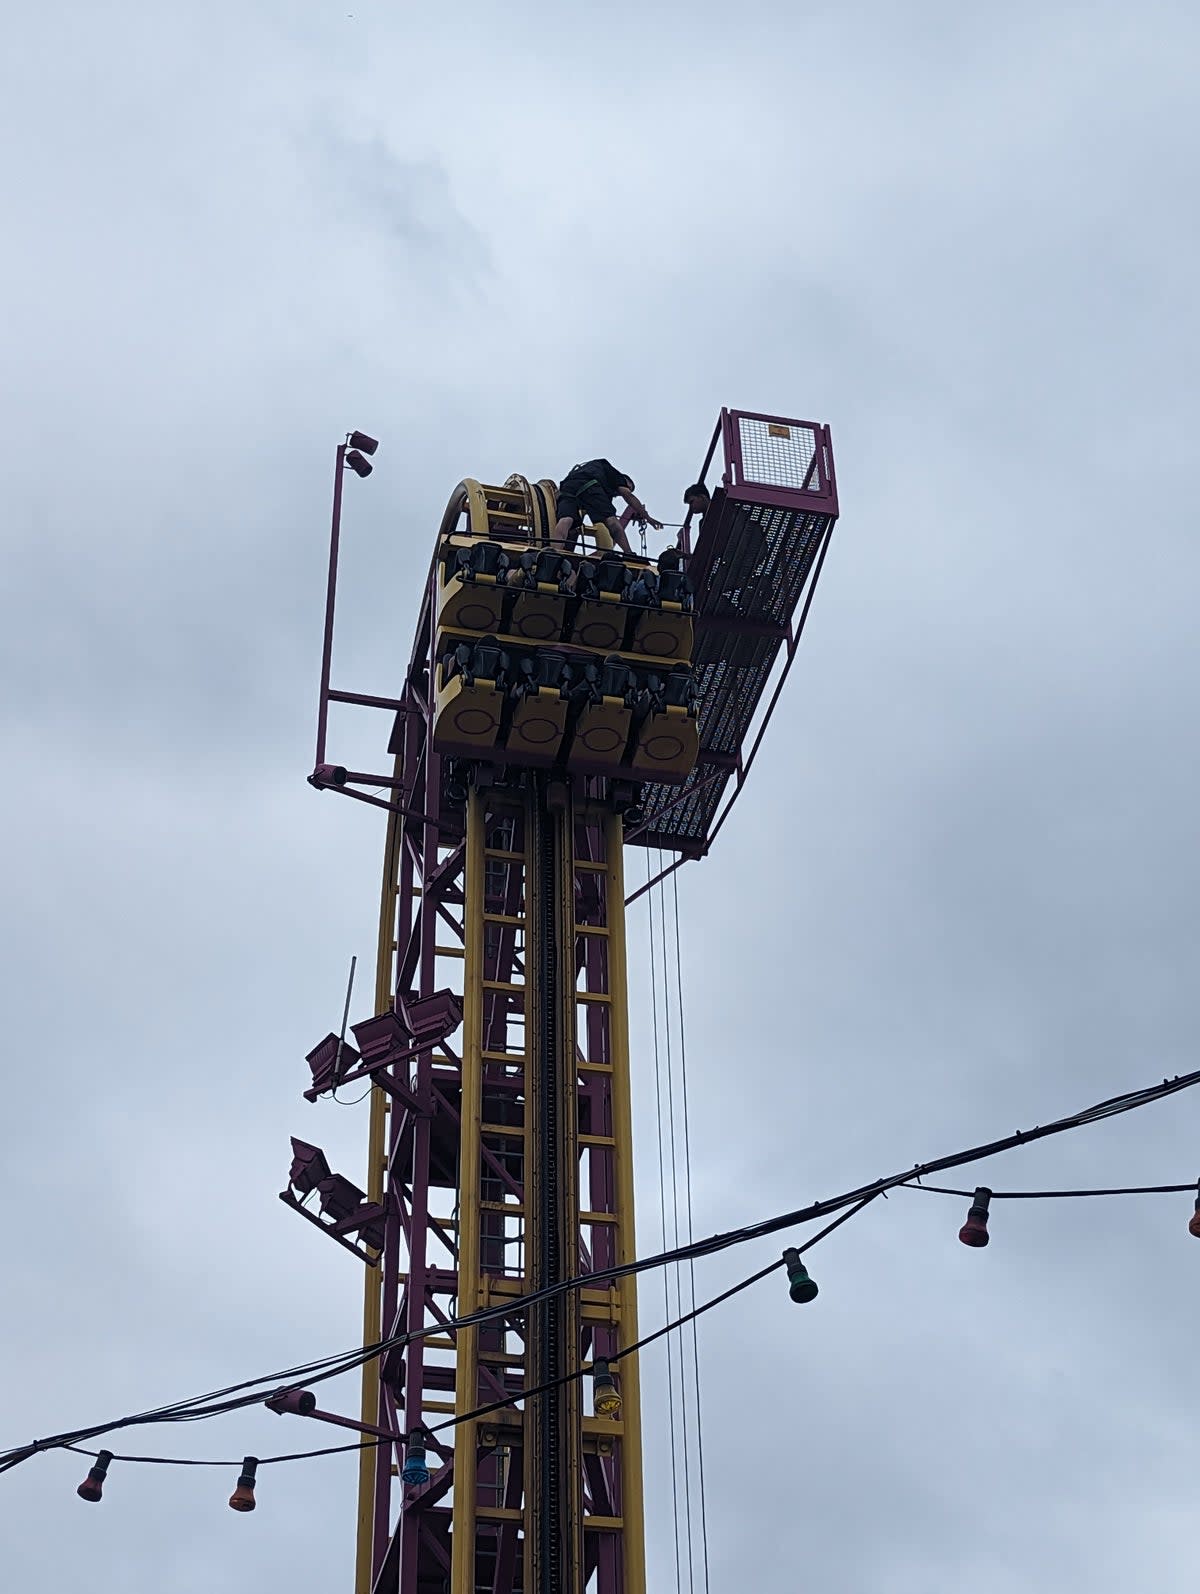 Footage posted on social media showed passengers left hanging at a near-90-degree angle on Friday afternoon, after the ride Rage at theme park Adventure Island, in Southend, came to an abrupt halt mid-flight (SWNS)